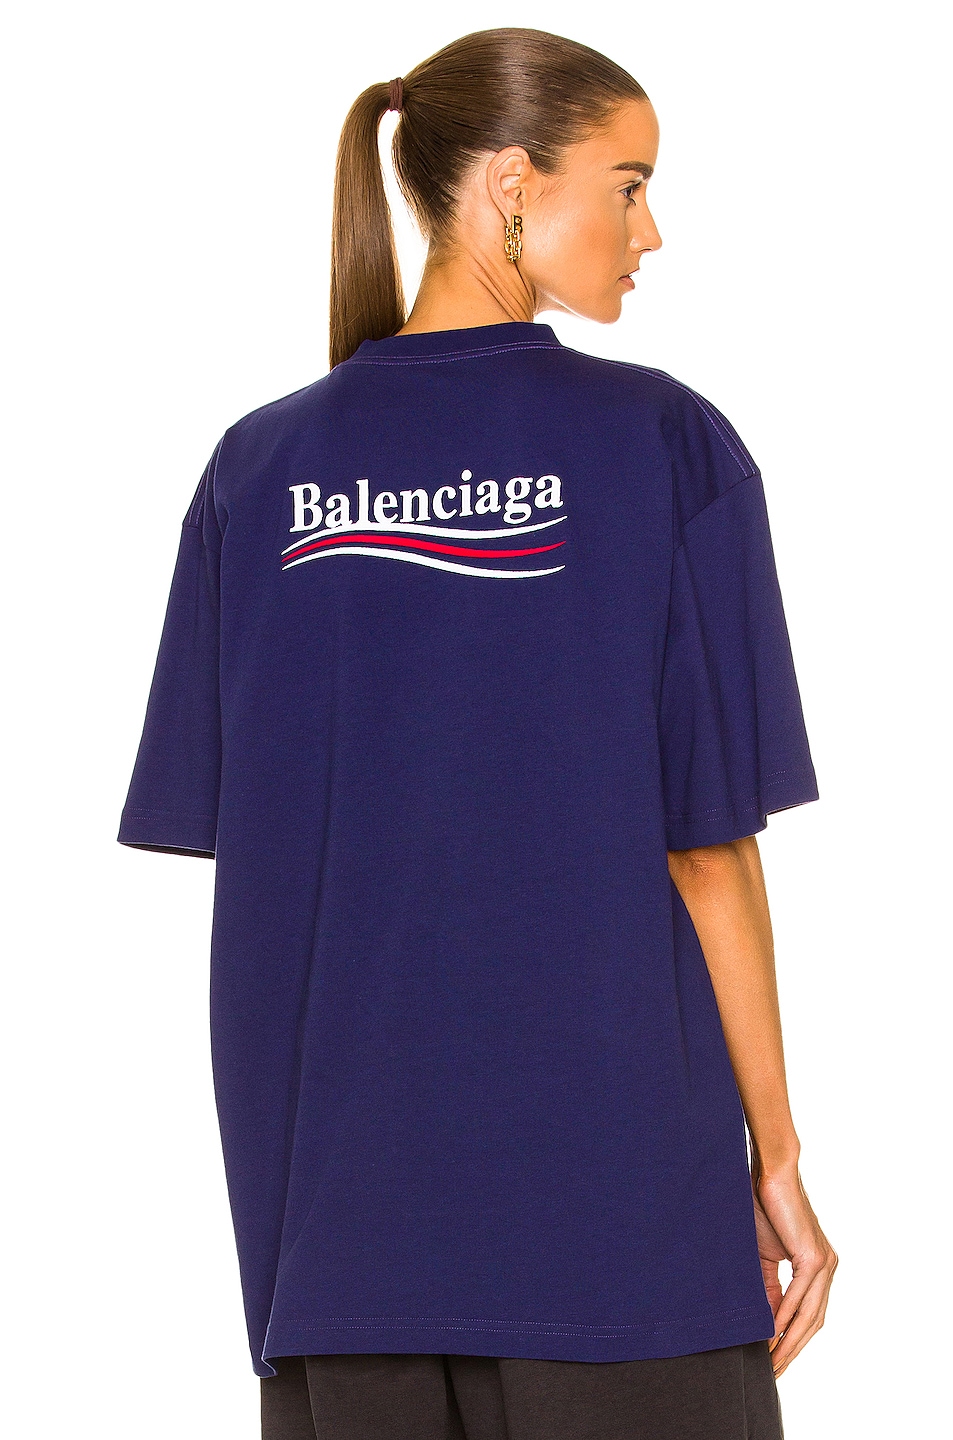 Image 1 of Balenciaga Large Fit T-Shirt in Pacific Blue & White